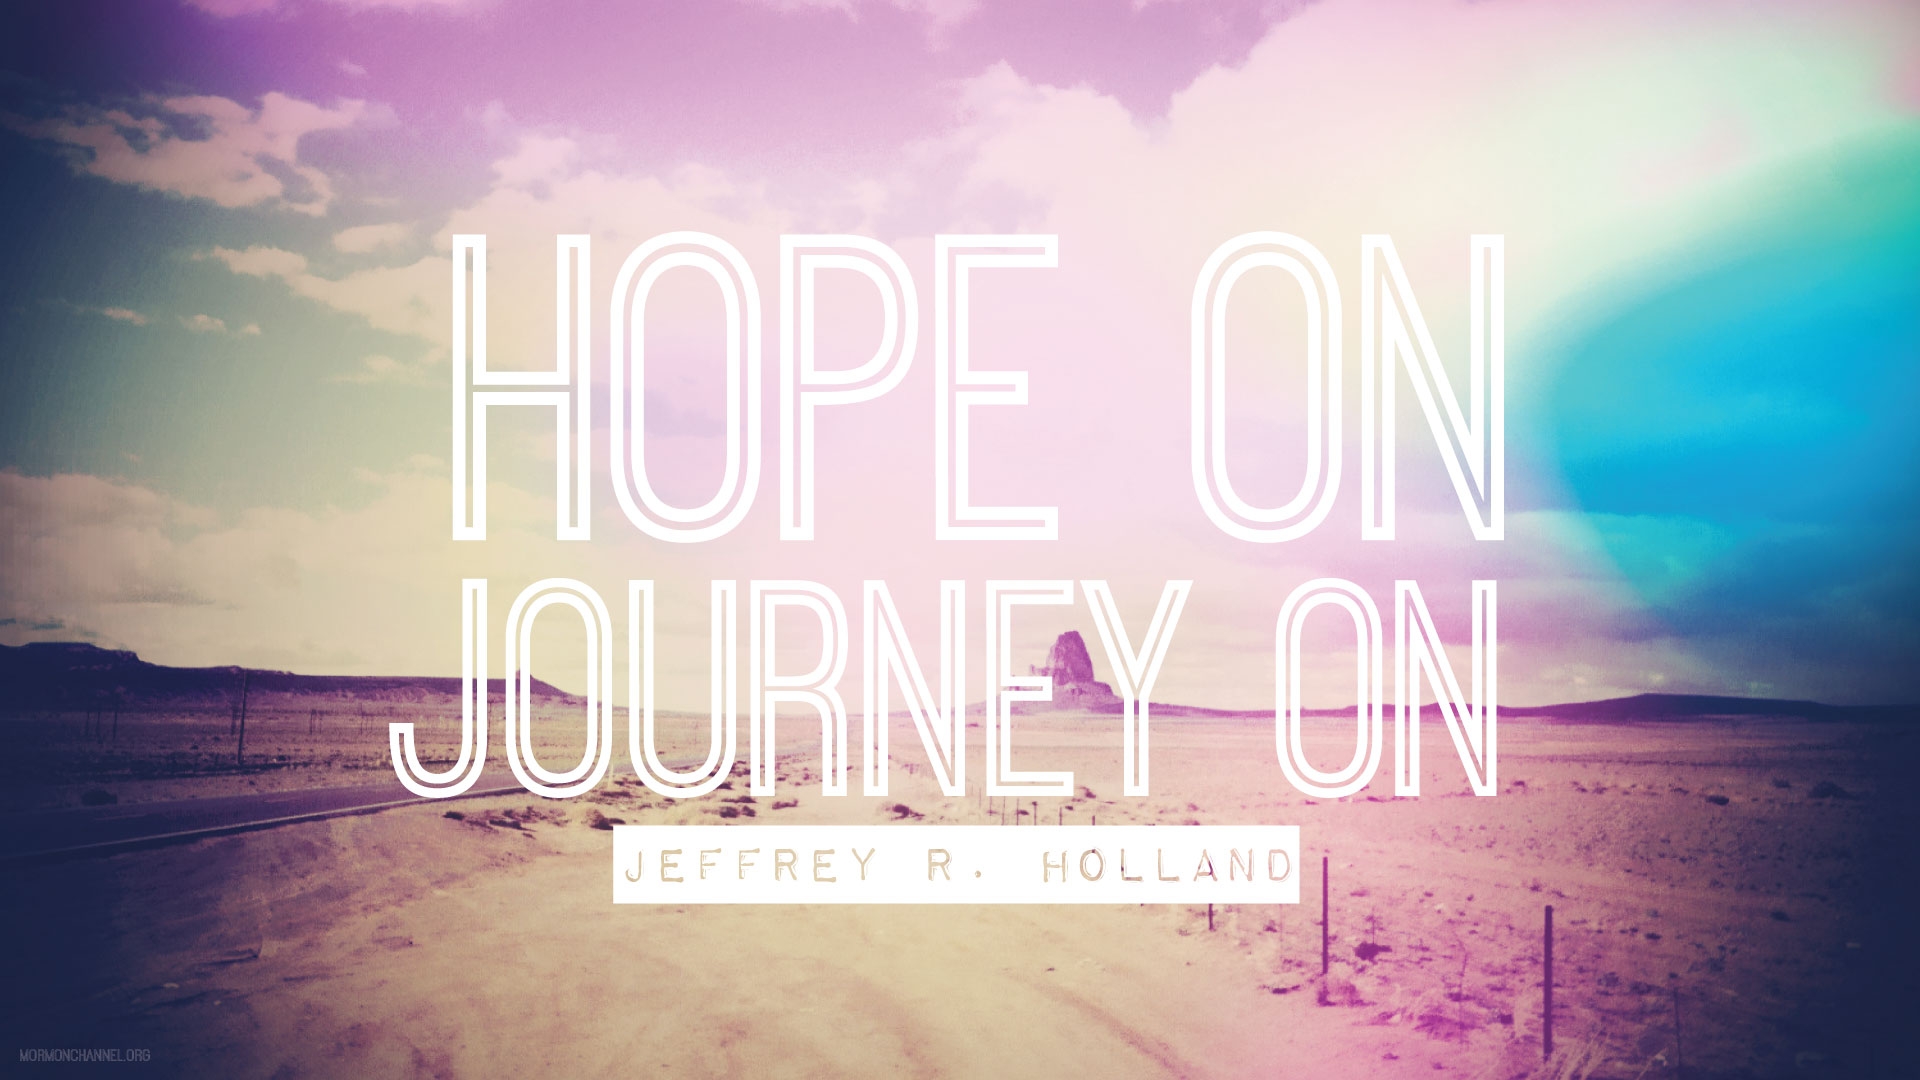 An image of a road combined with a quote by Elder Jeffrey R. Holland: “Hope on. Journey on.”